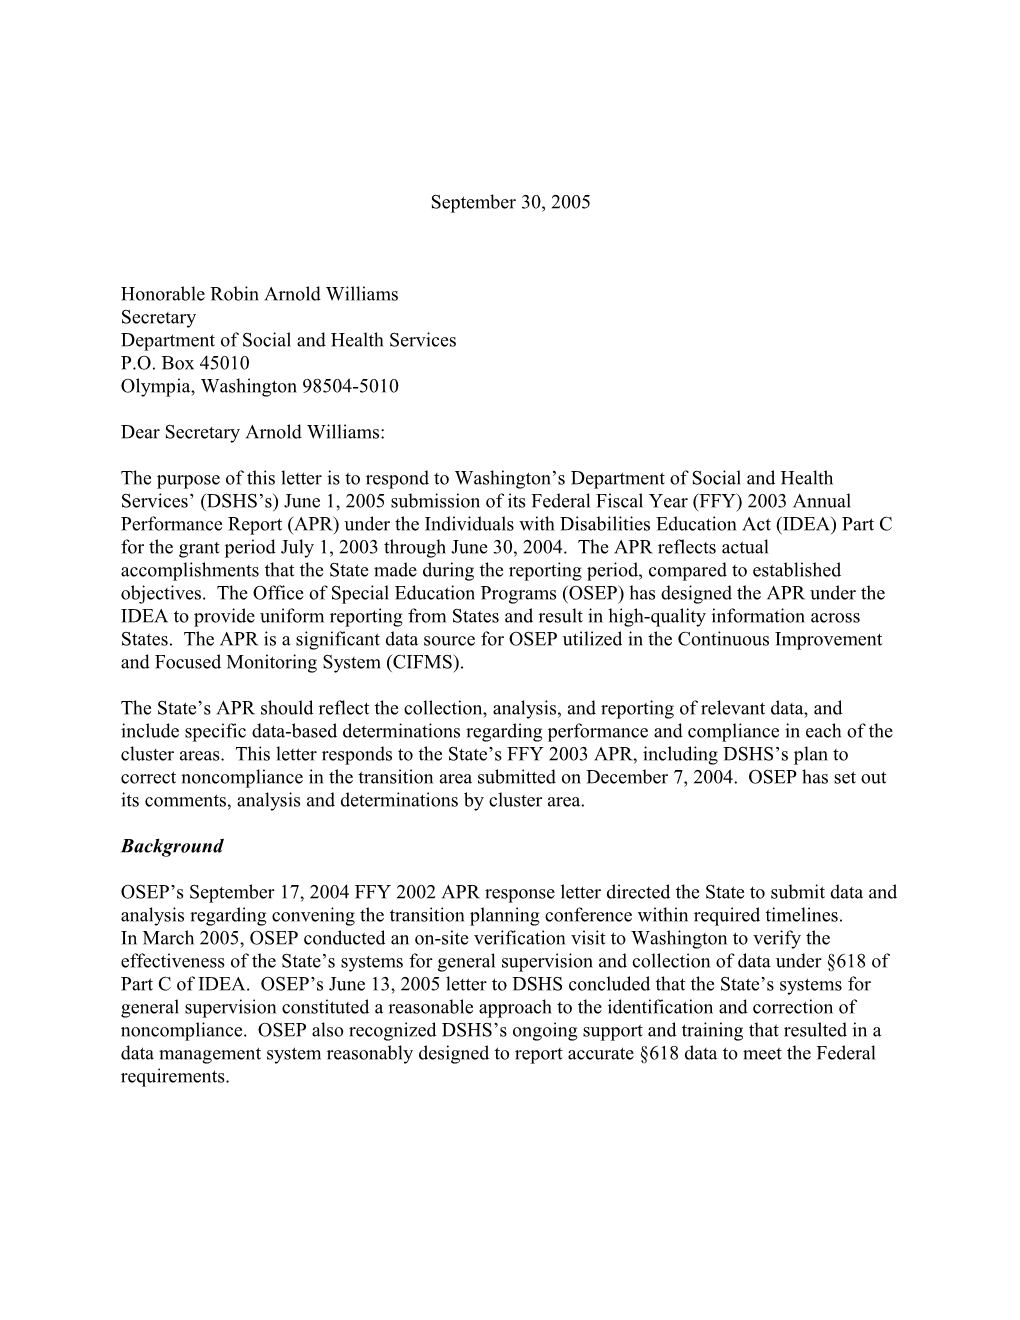 Washington Part C APR Letter for Grant Year 2003-2004 (Msword)